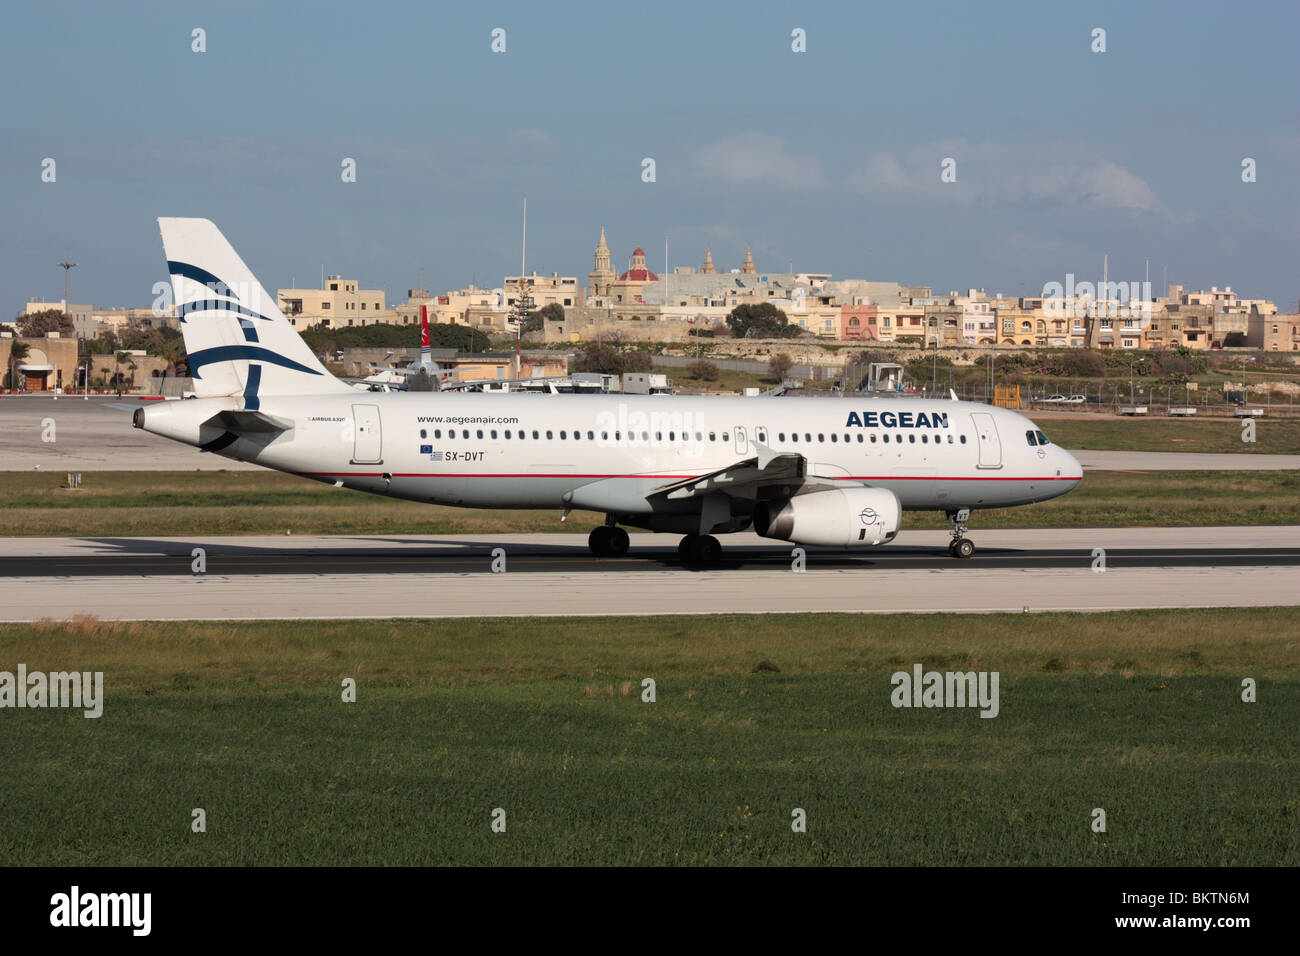 Aegean Airlines Airbus A320 passenger jet aeroplane on the runway taxiing for departure Stock Photo